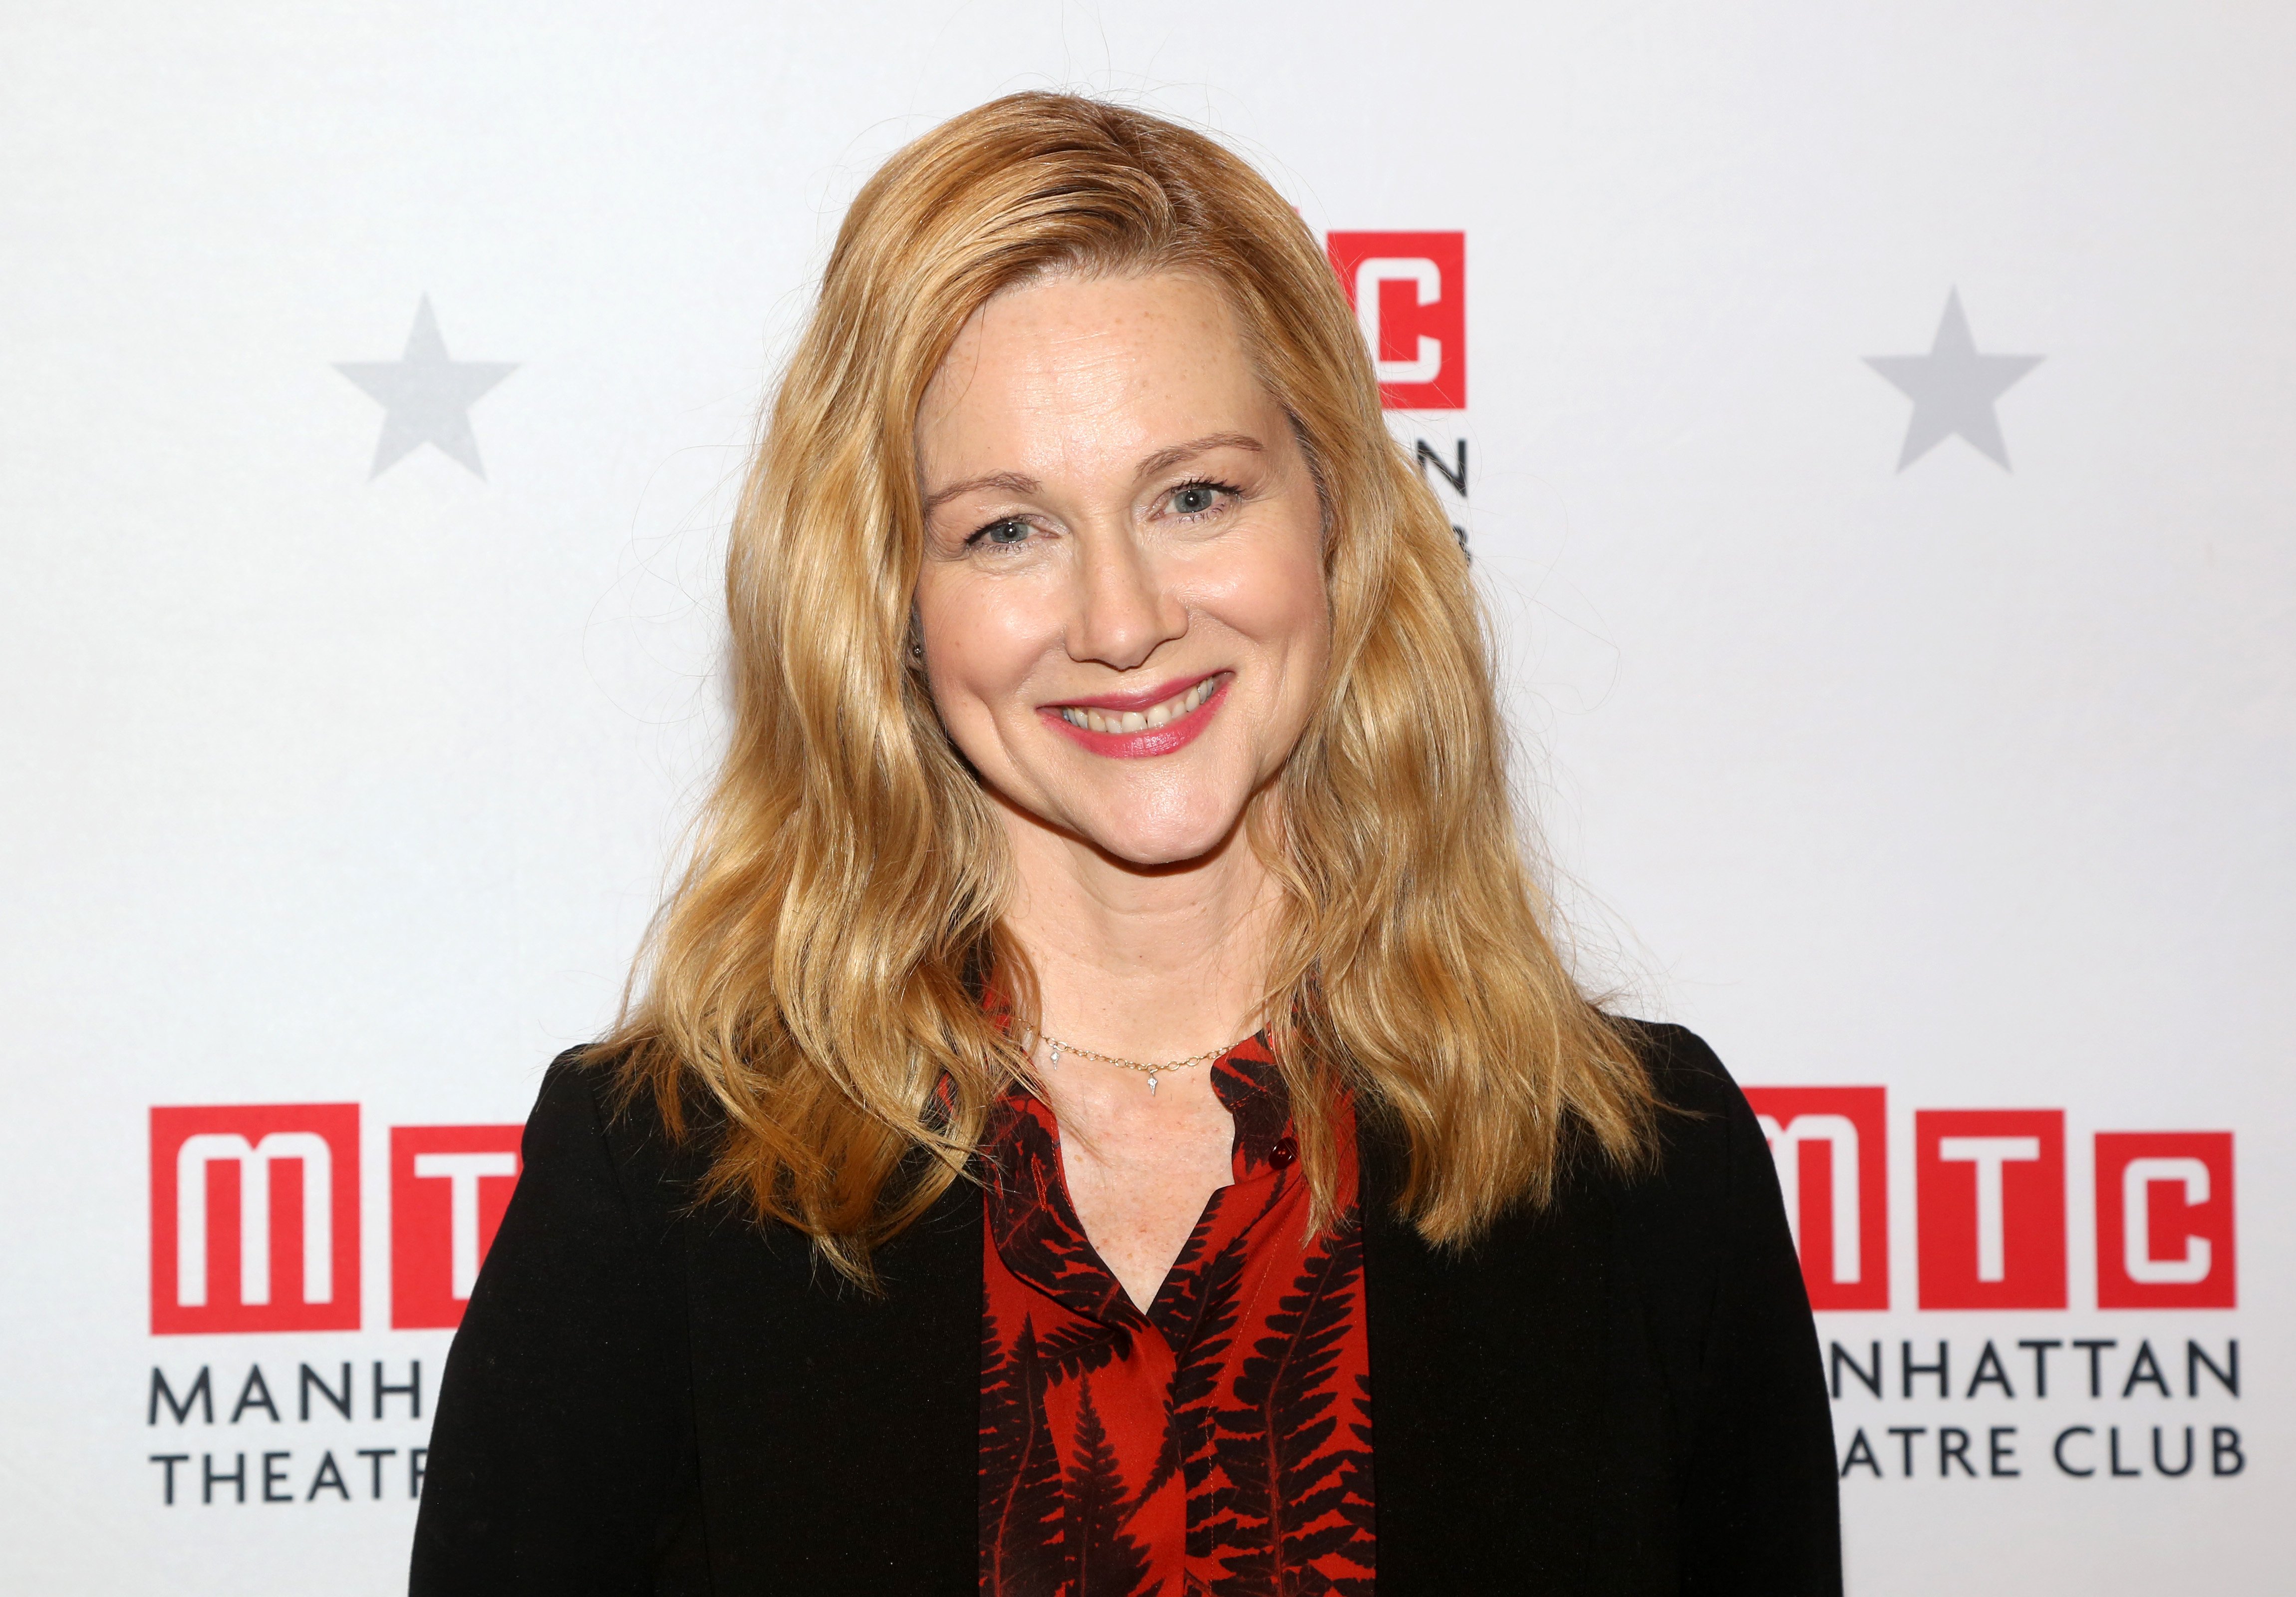 Laura Linney at The Manhattan Theatre Club Rehearsal Studios on December 12, 2019, in New York City. | Source: Getty Images